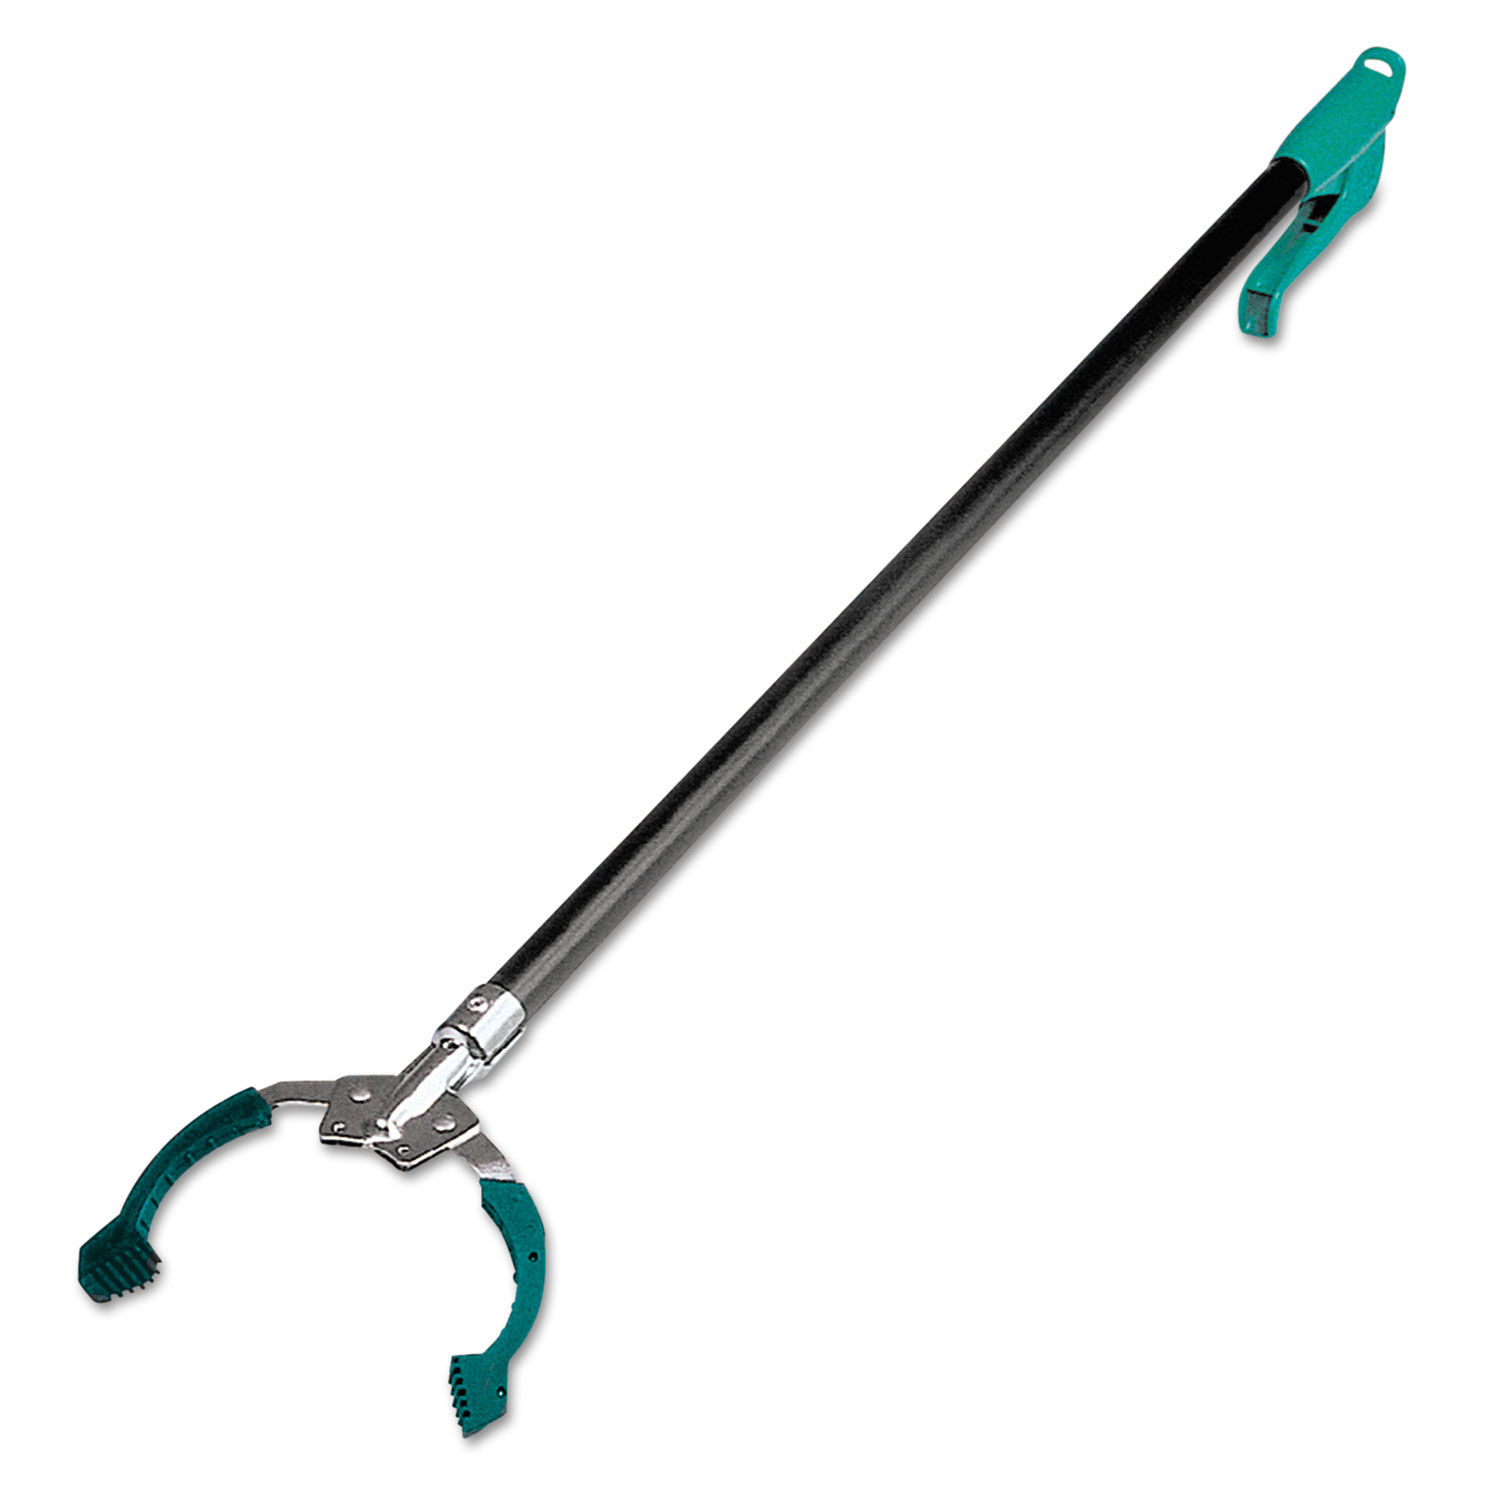  Unger NN400 Nifty Nabber Extension Arm with Claw, 18in, Black/Green (UNGNN400) 